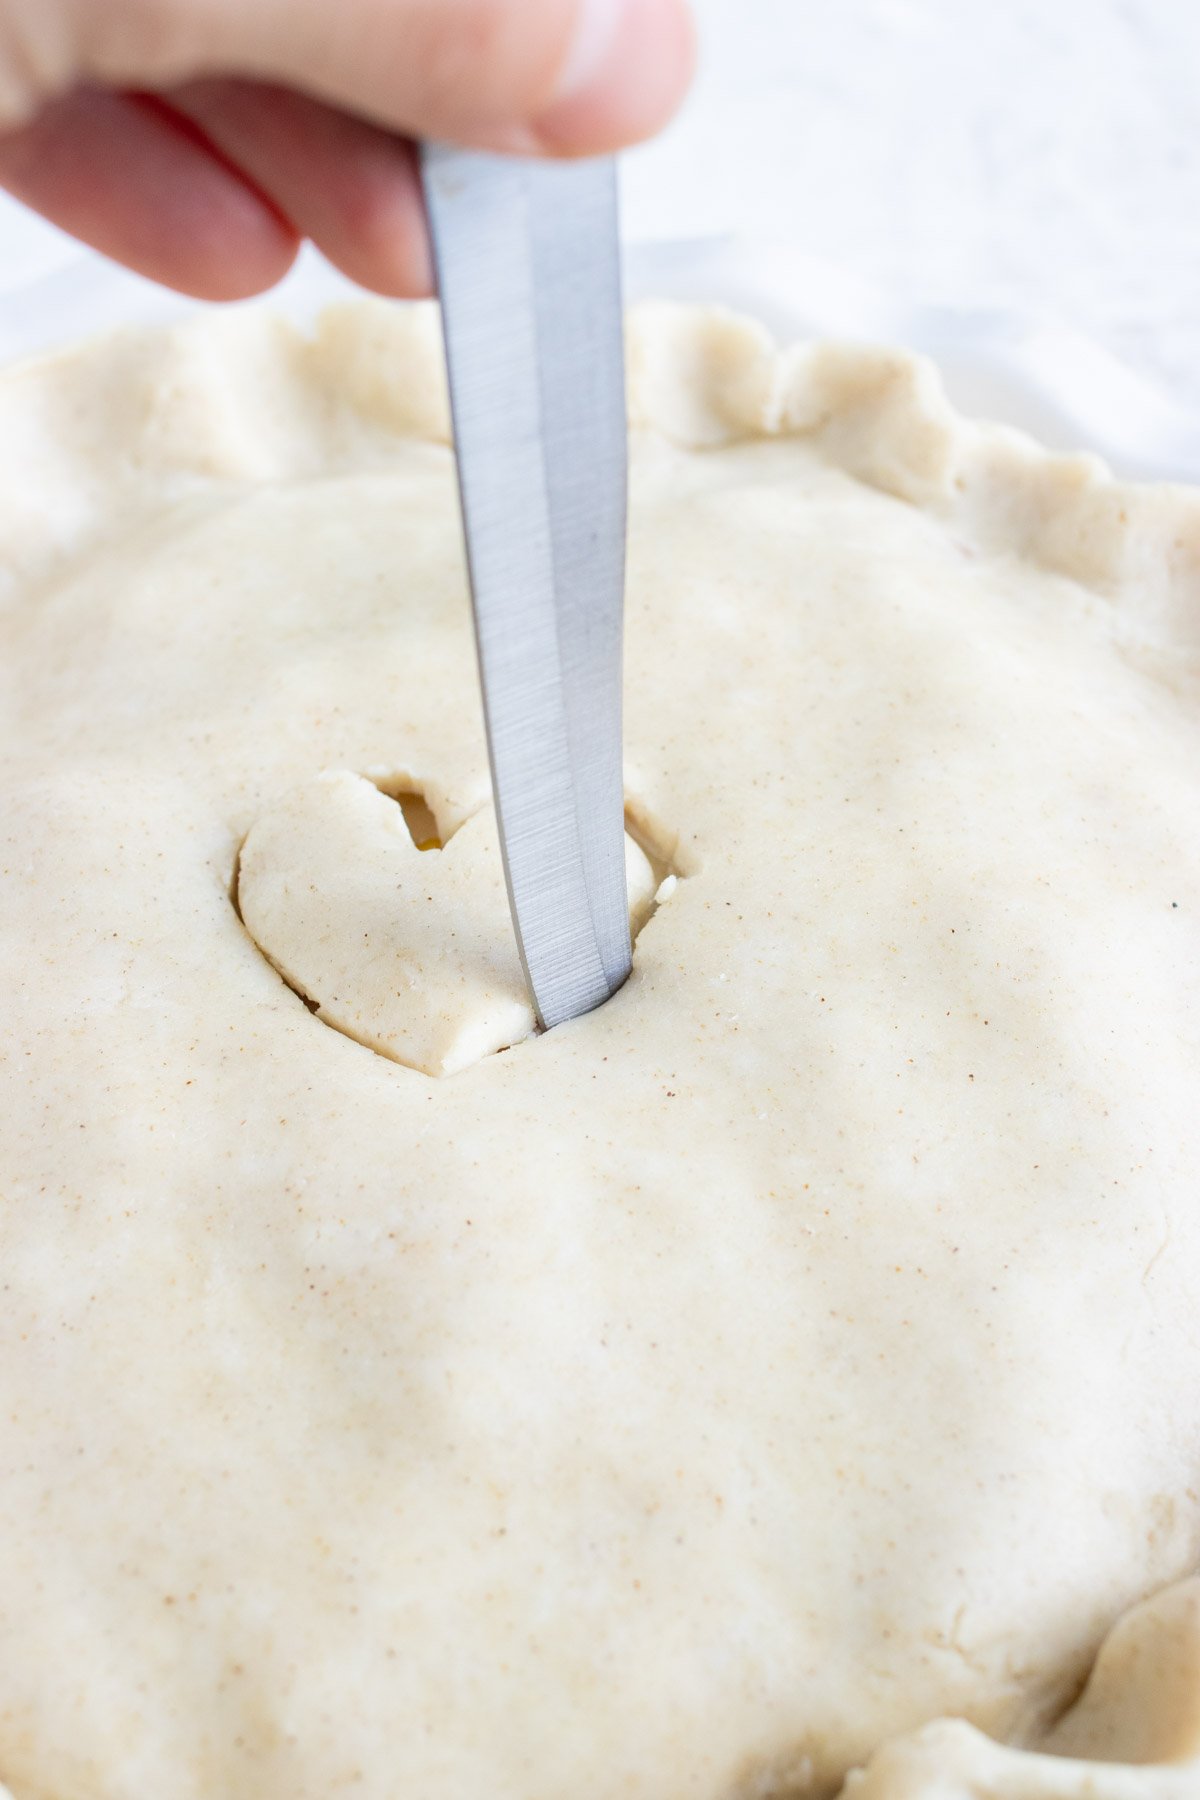 A knife is used to cut out a heart on the top pie crust.